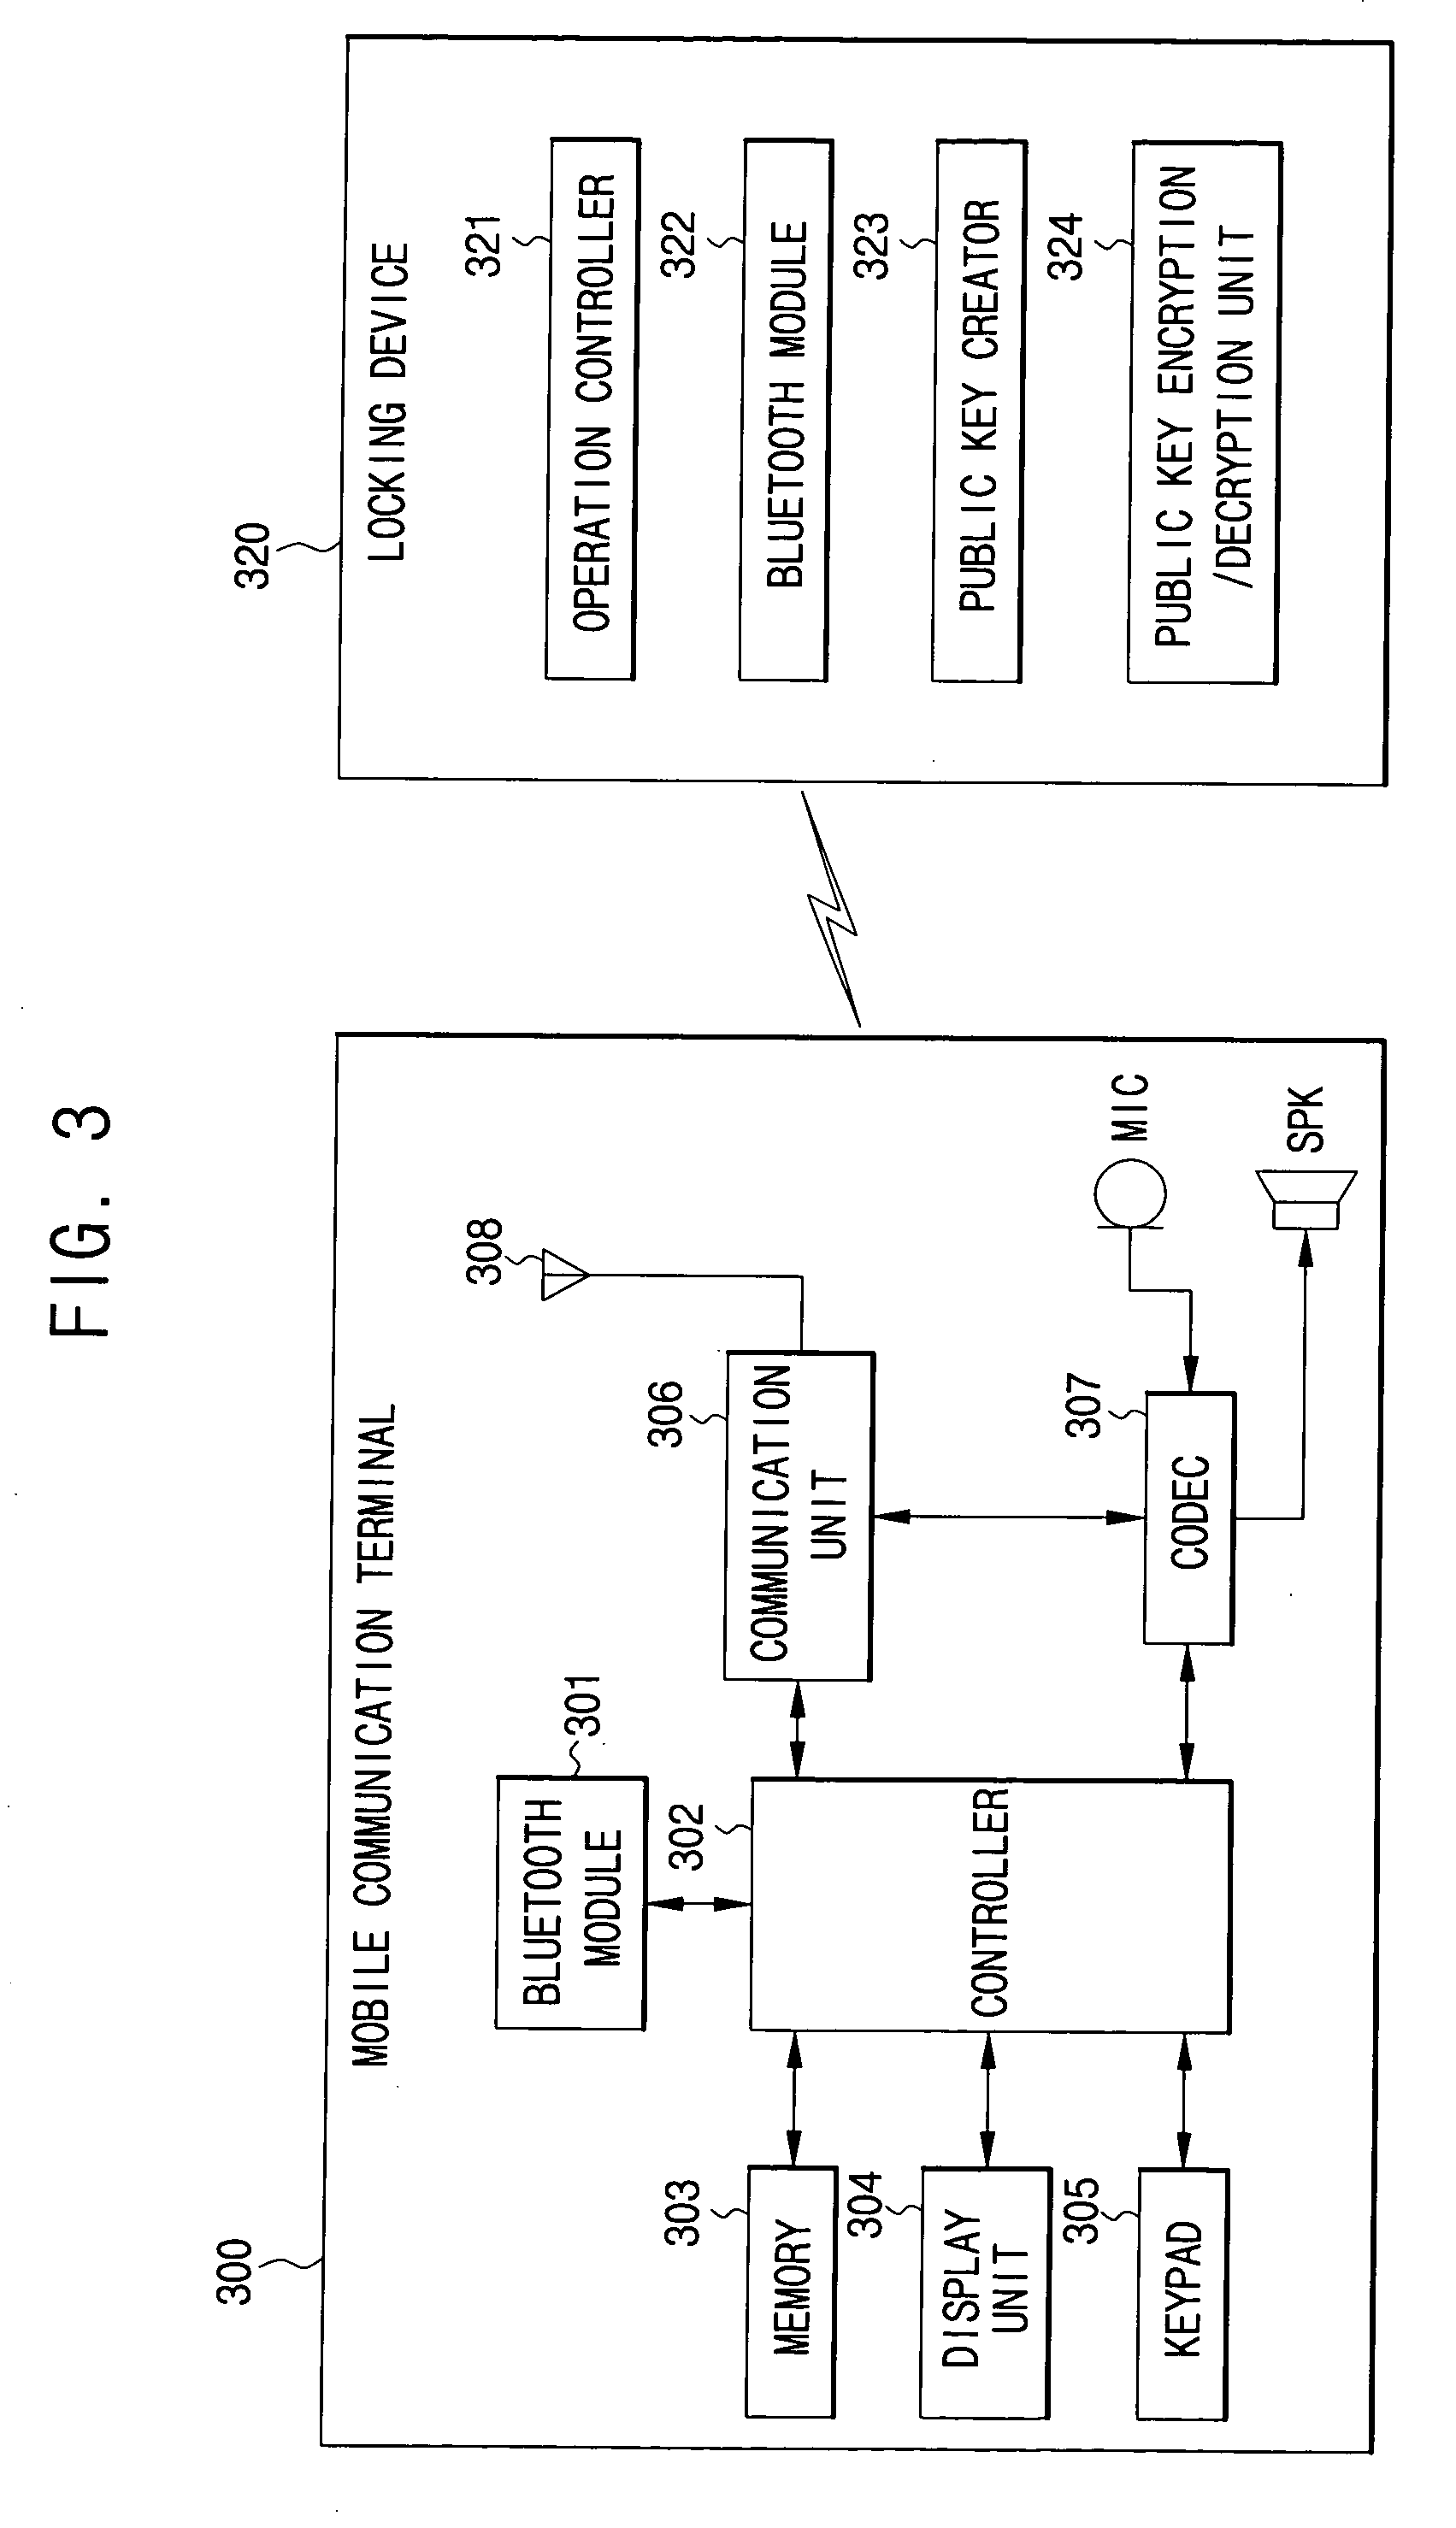 Public key infrastructure-based bluetooth smart-key system and operating method thereof